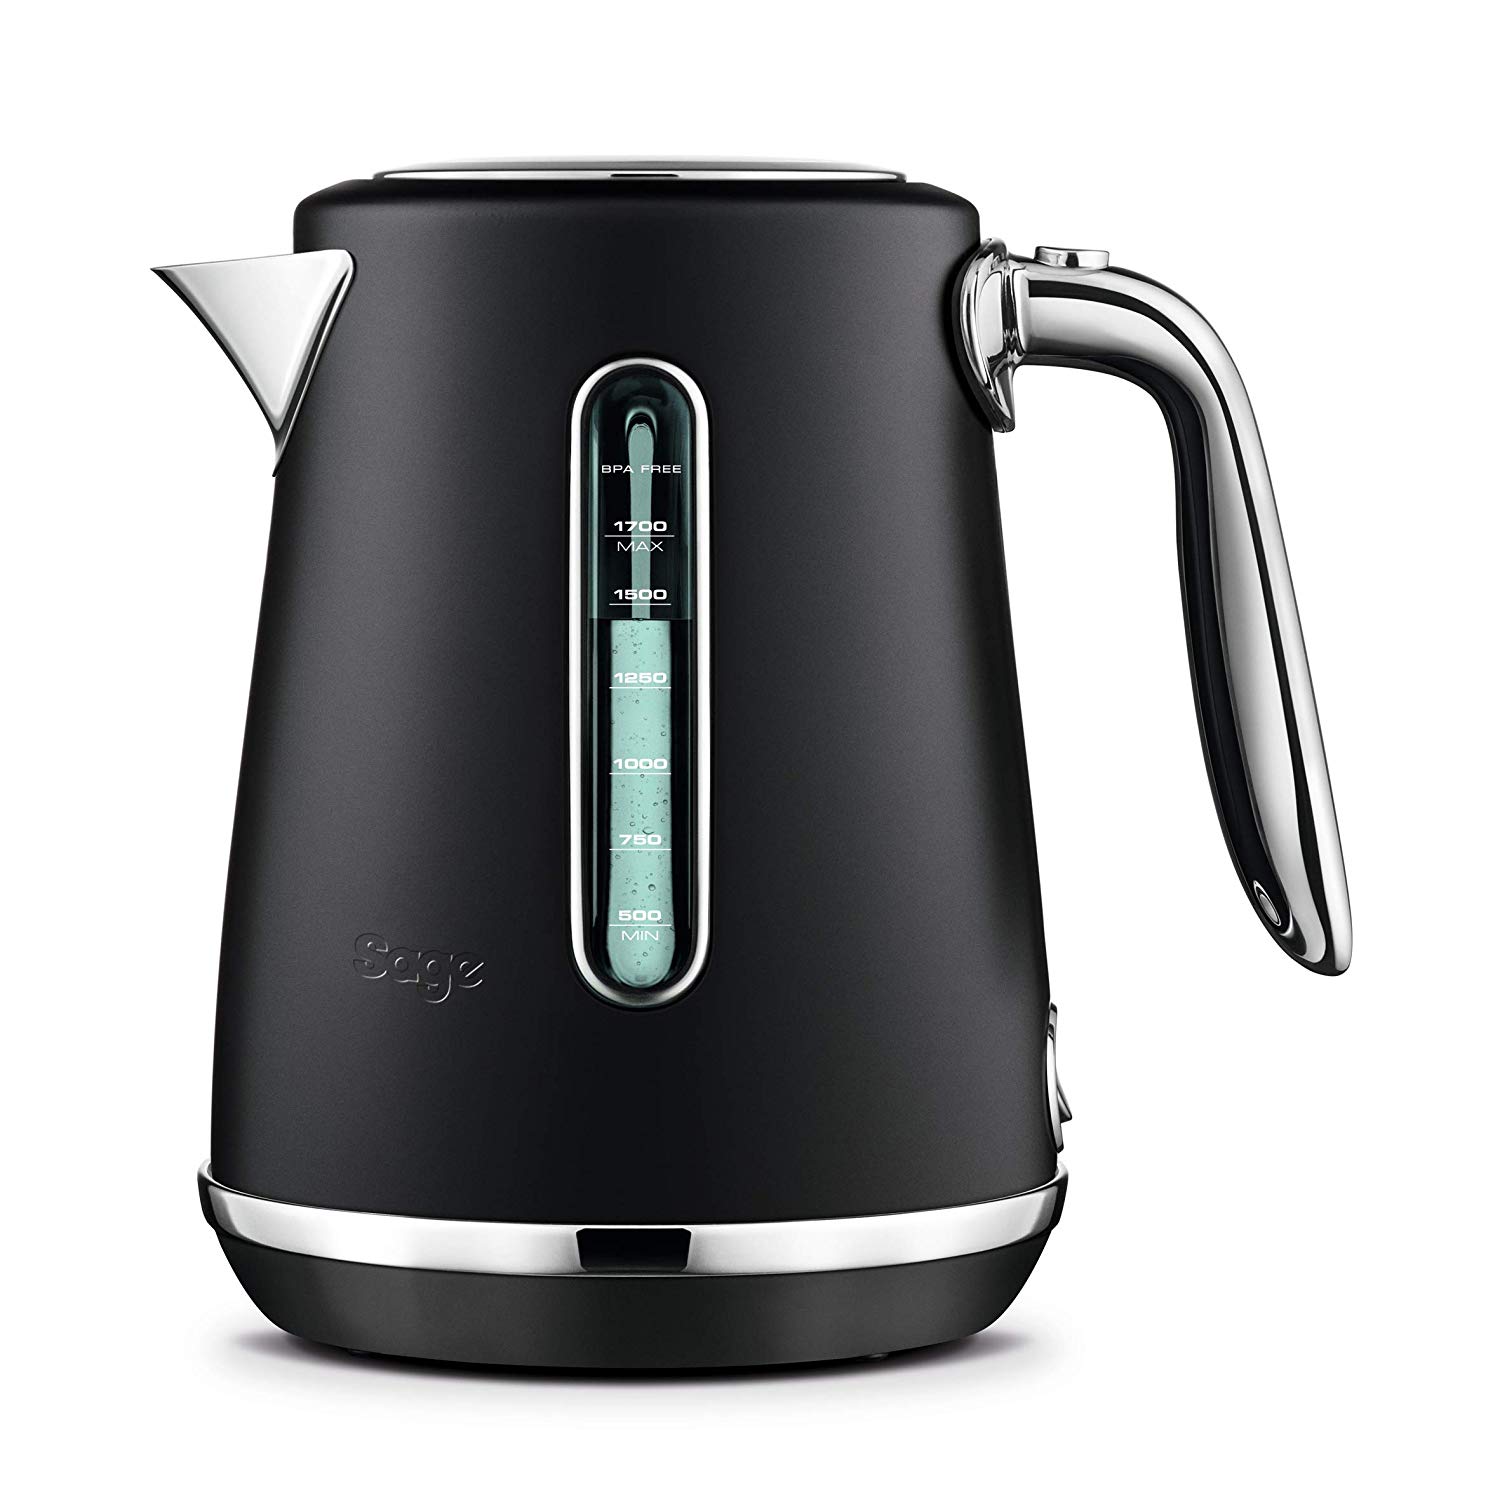 Sage Appliances Ske735 The Soft Top Luxe Kettle Anthracite